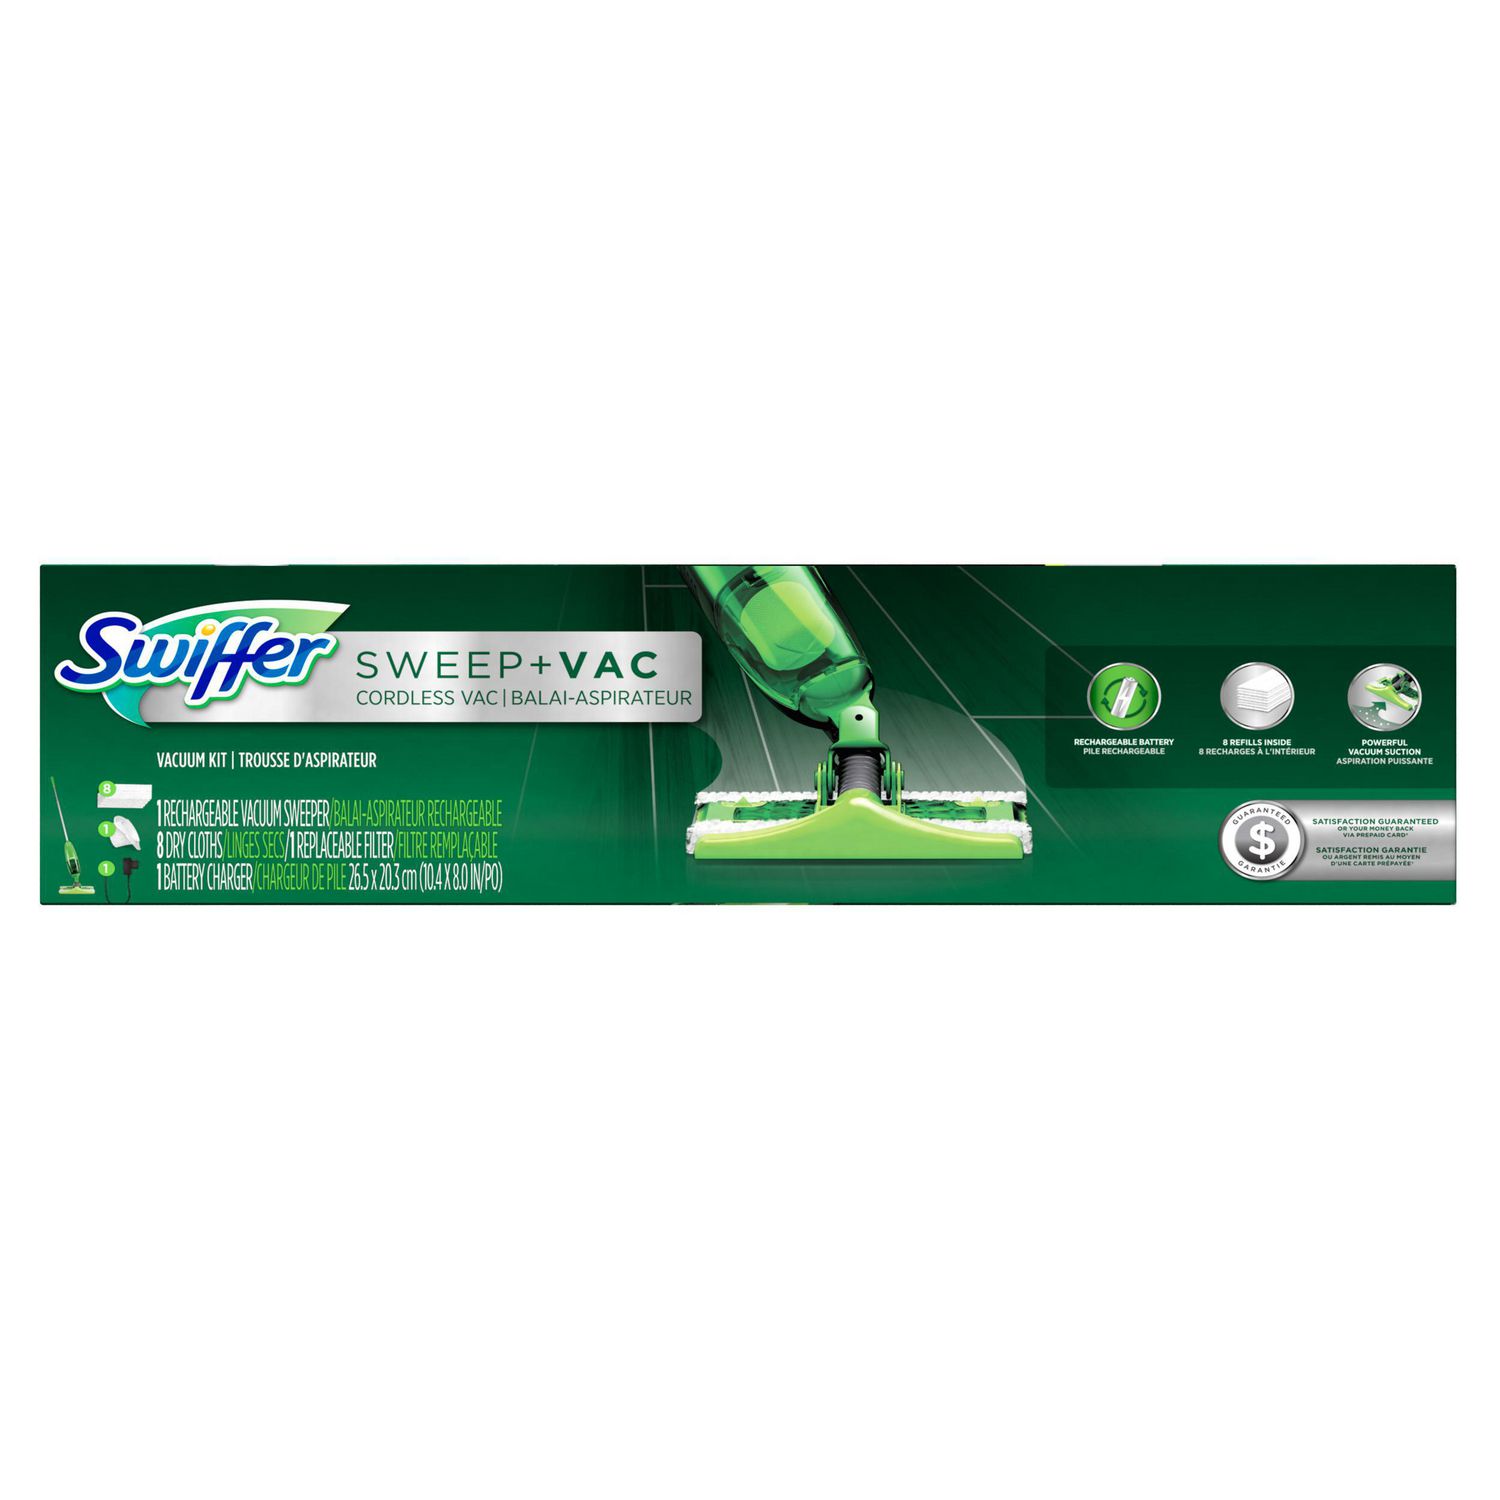 How do you replace a Swiffer vac battery?